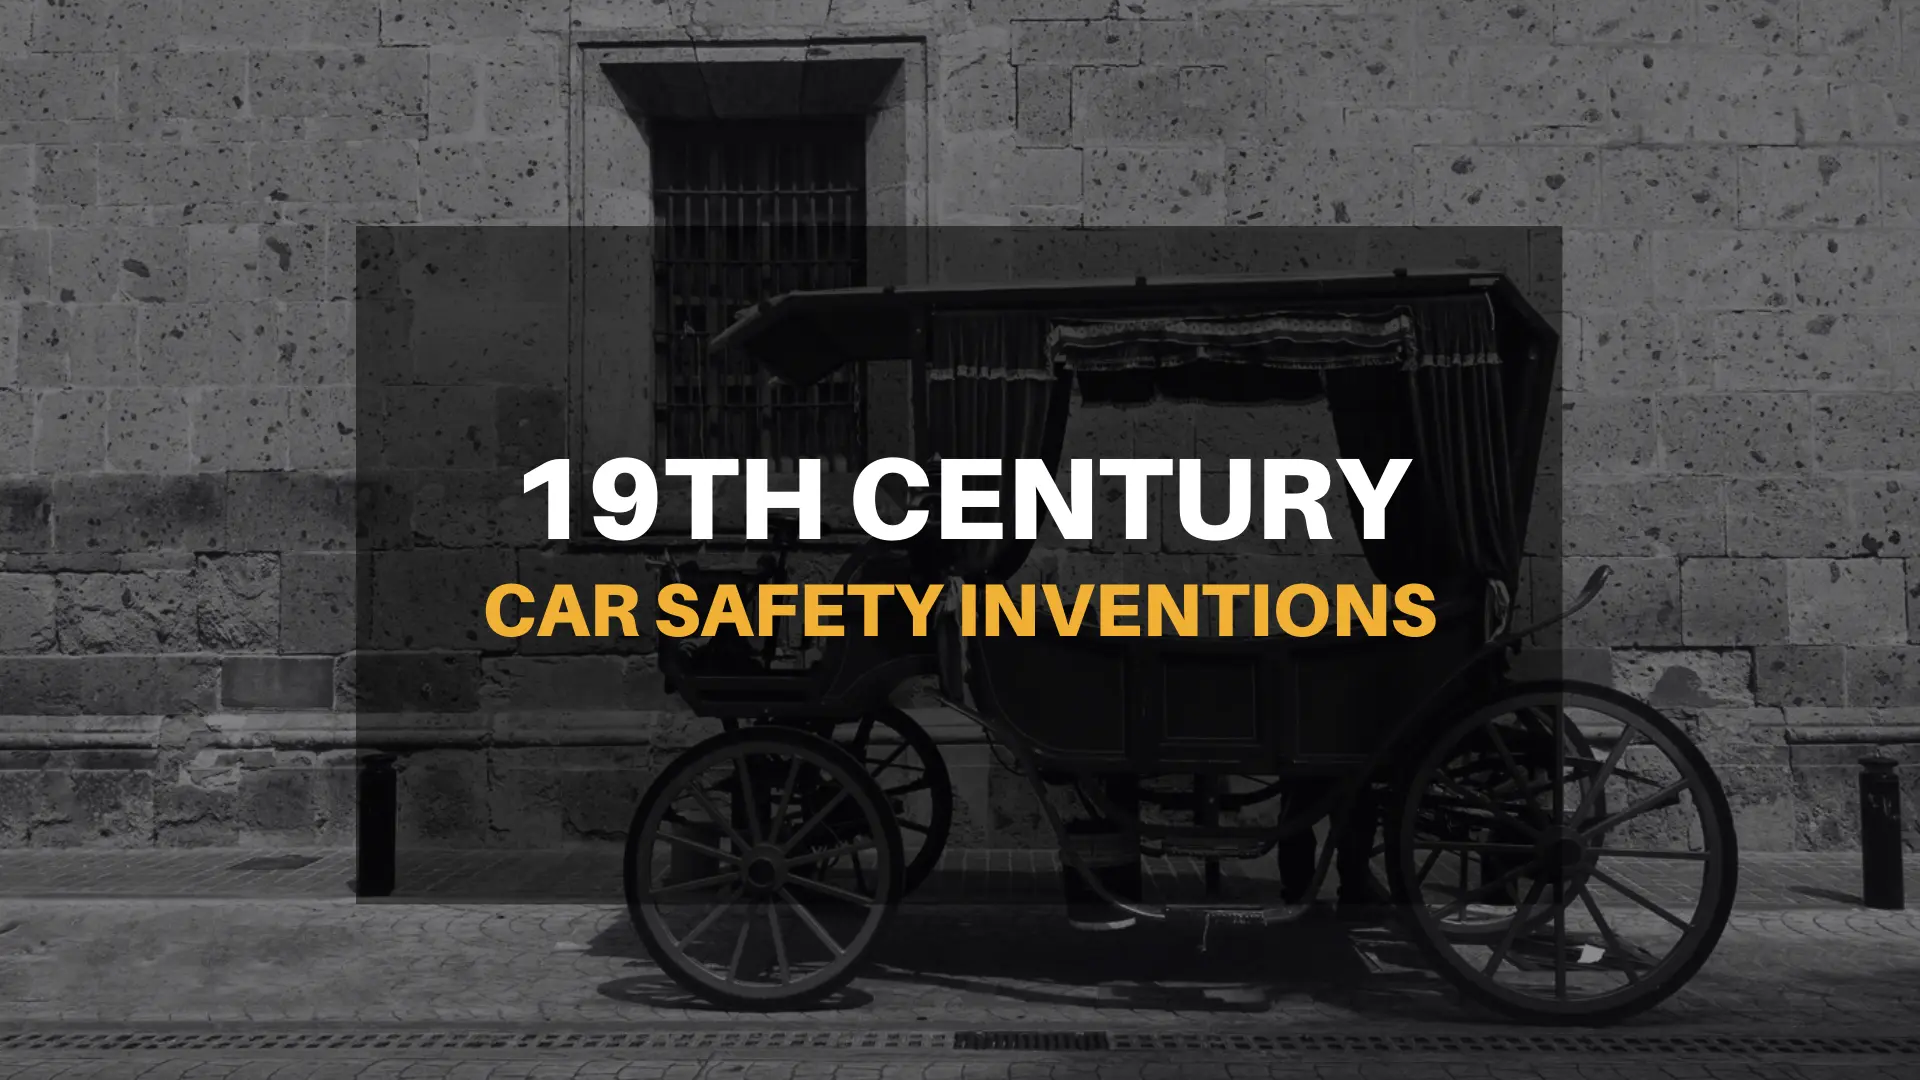 19th century car safety inventions